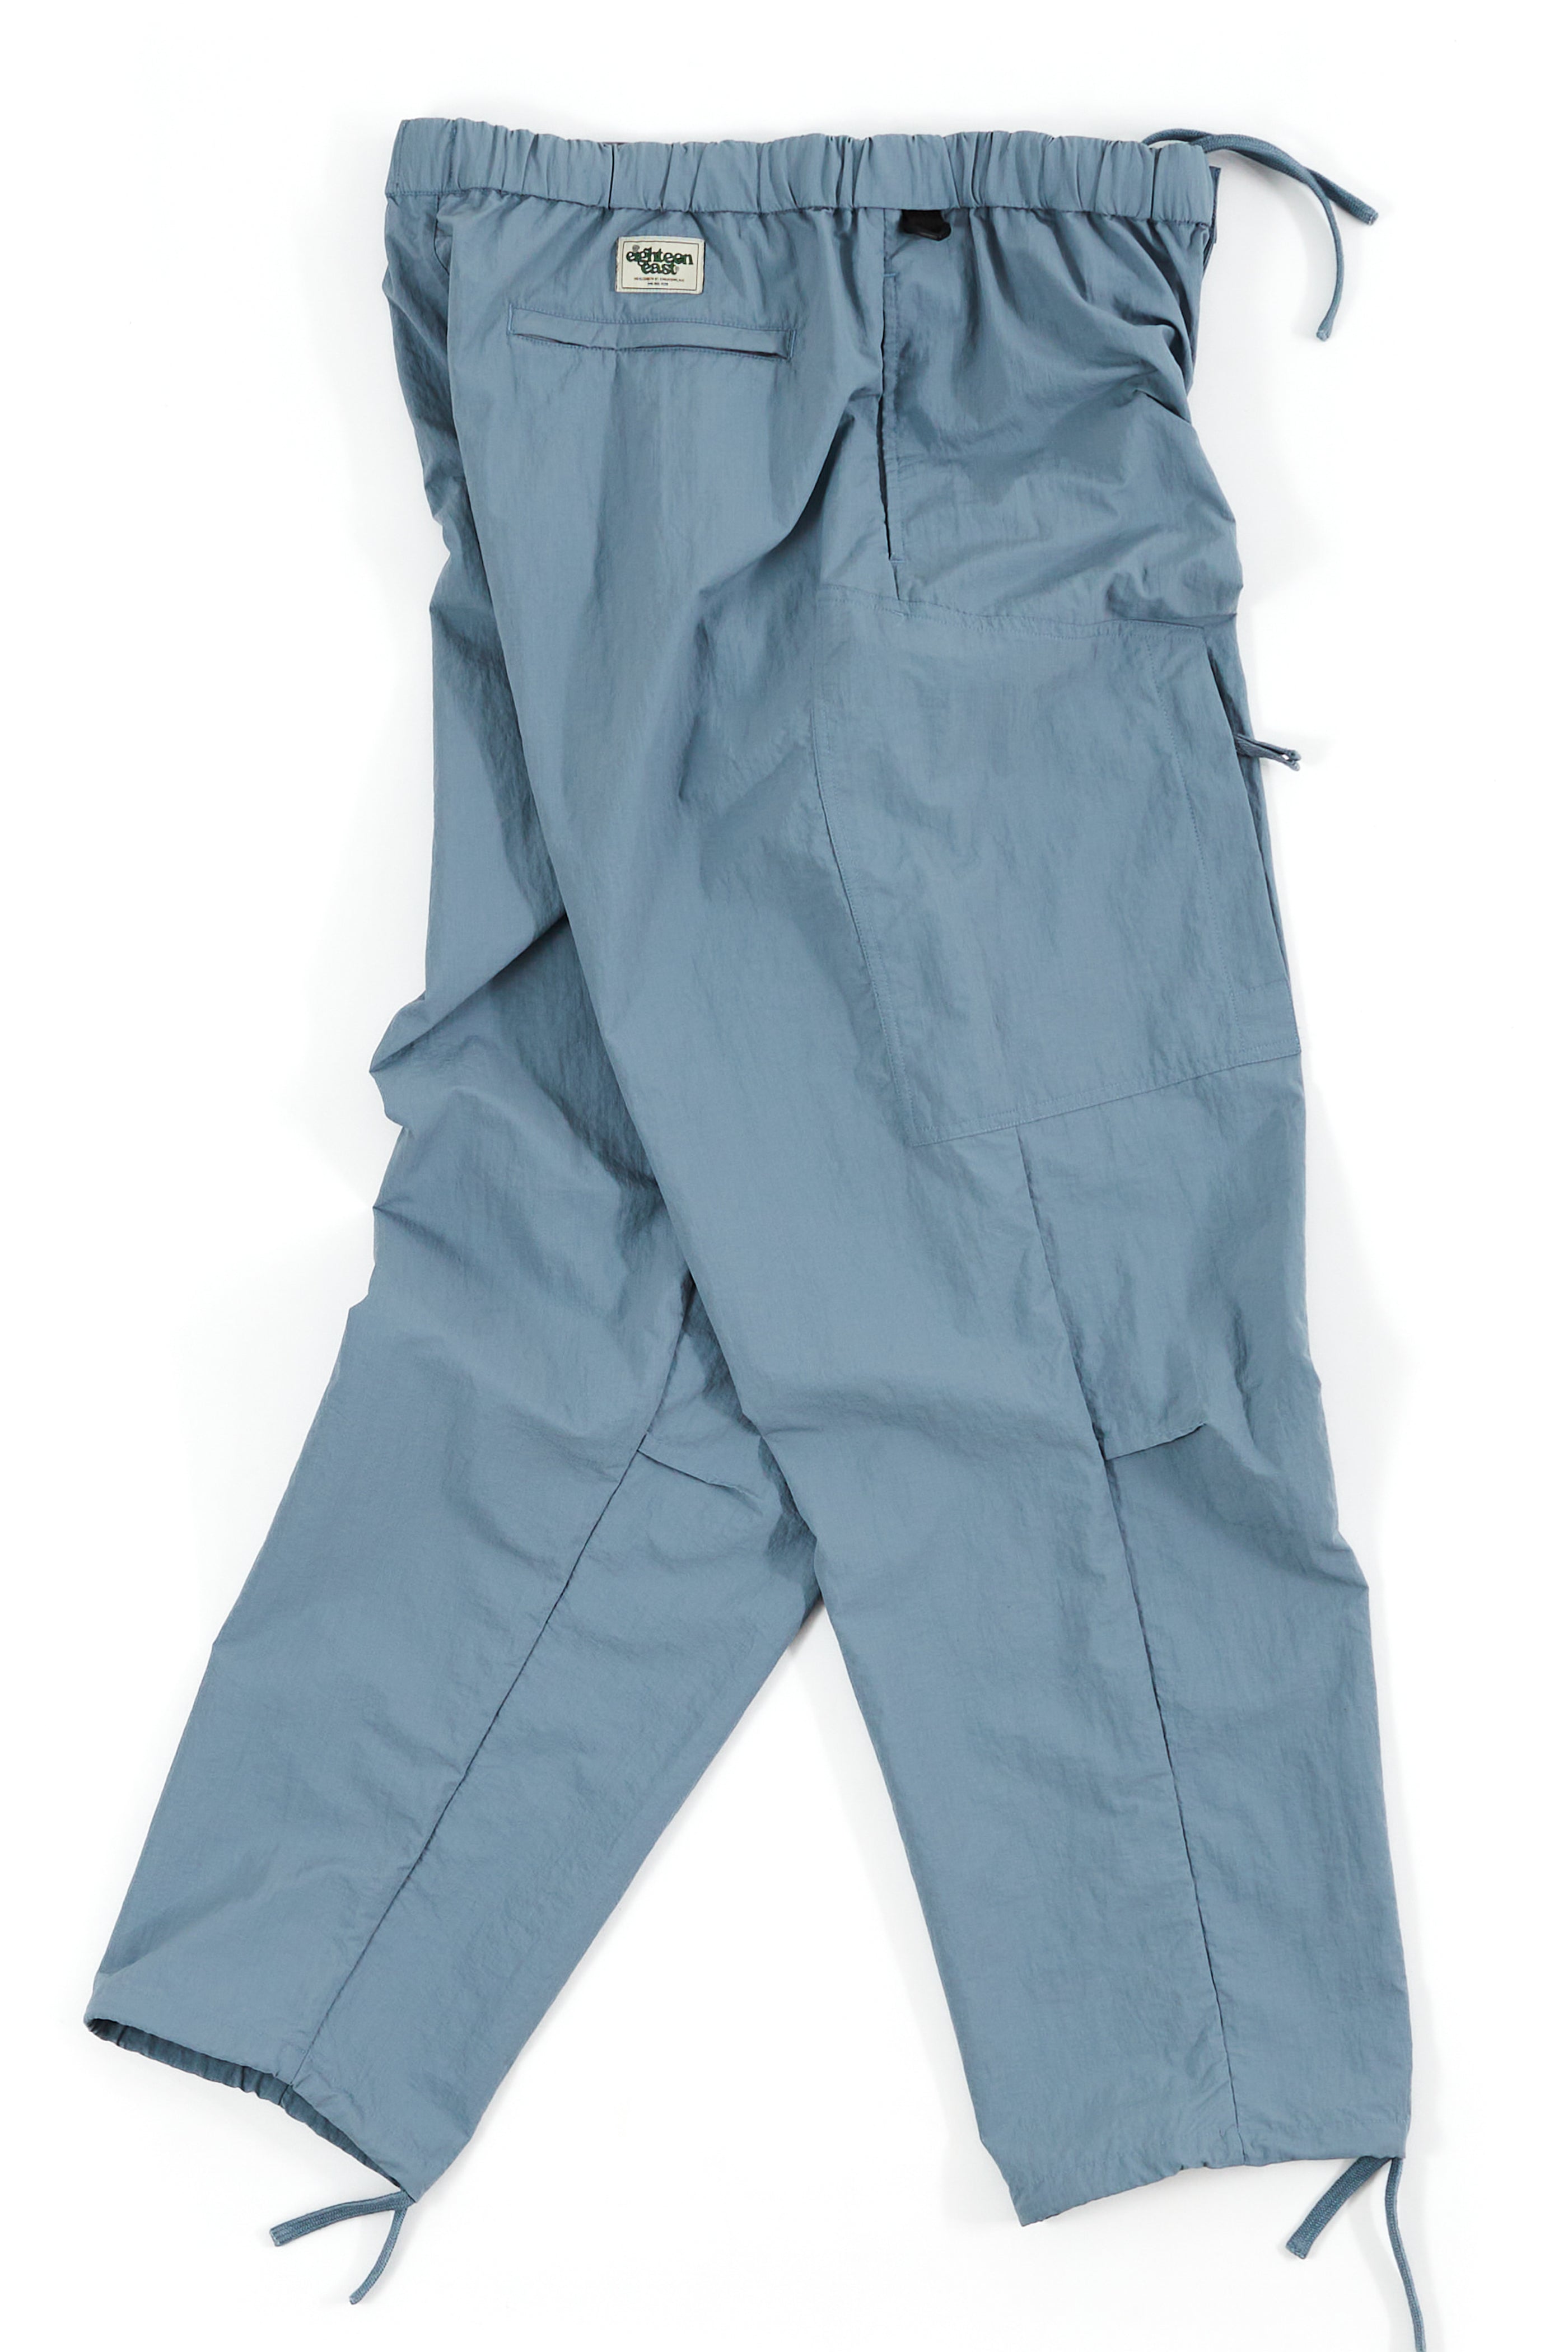 The North Face Paramount Trail Convertible Pants - Men's | The Last Hunt